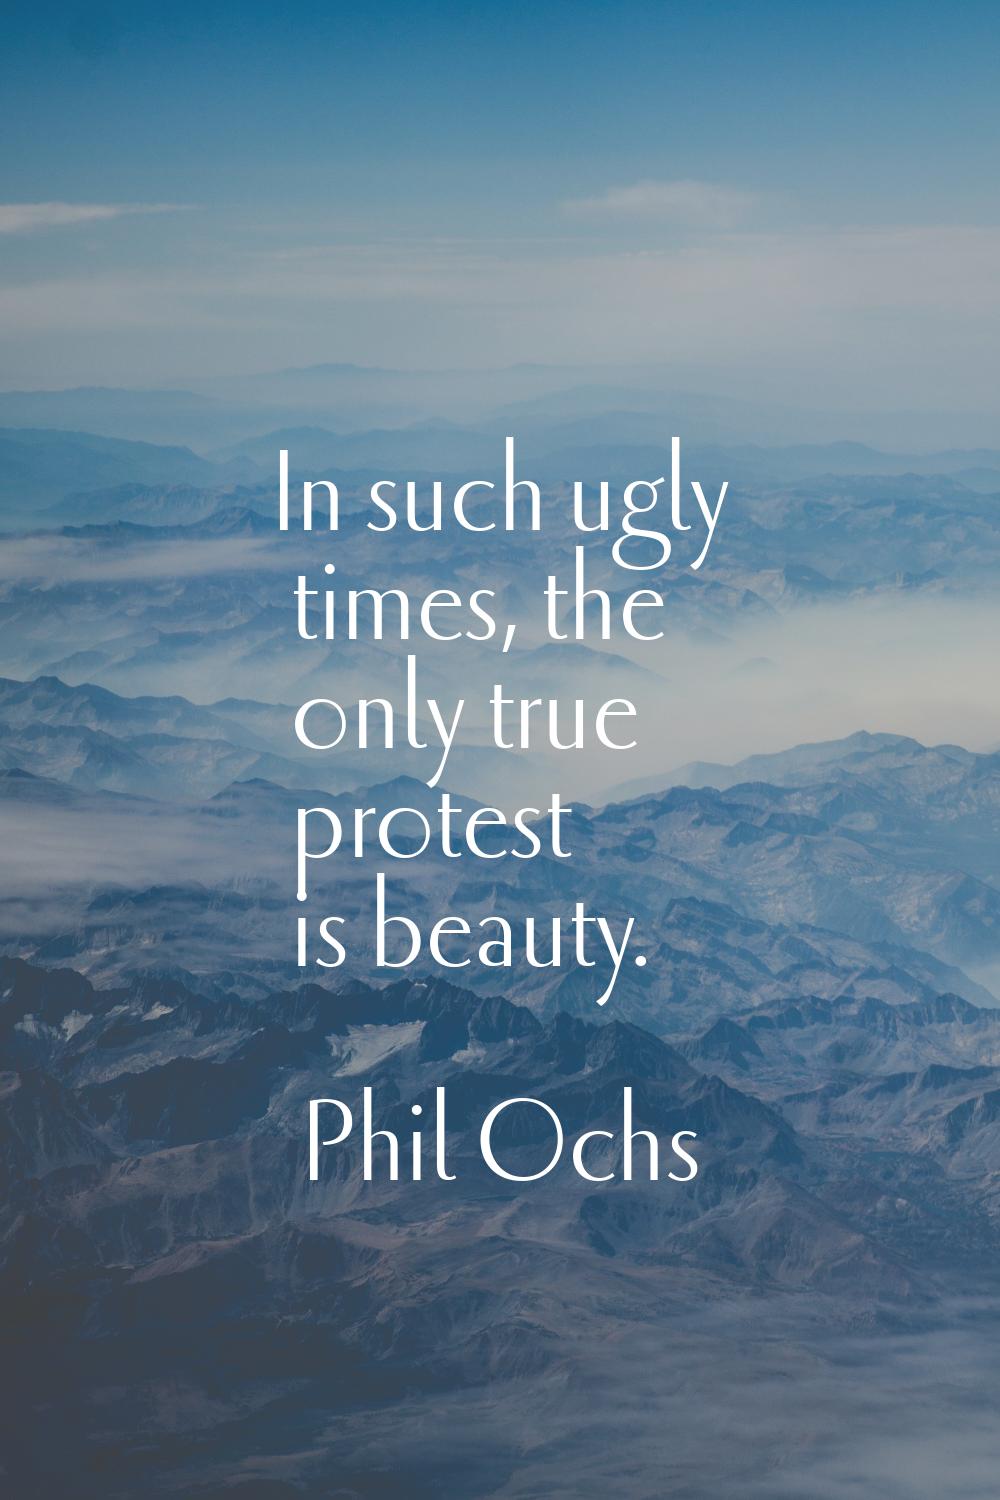 In such ugly times, the only true protest is beauty.